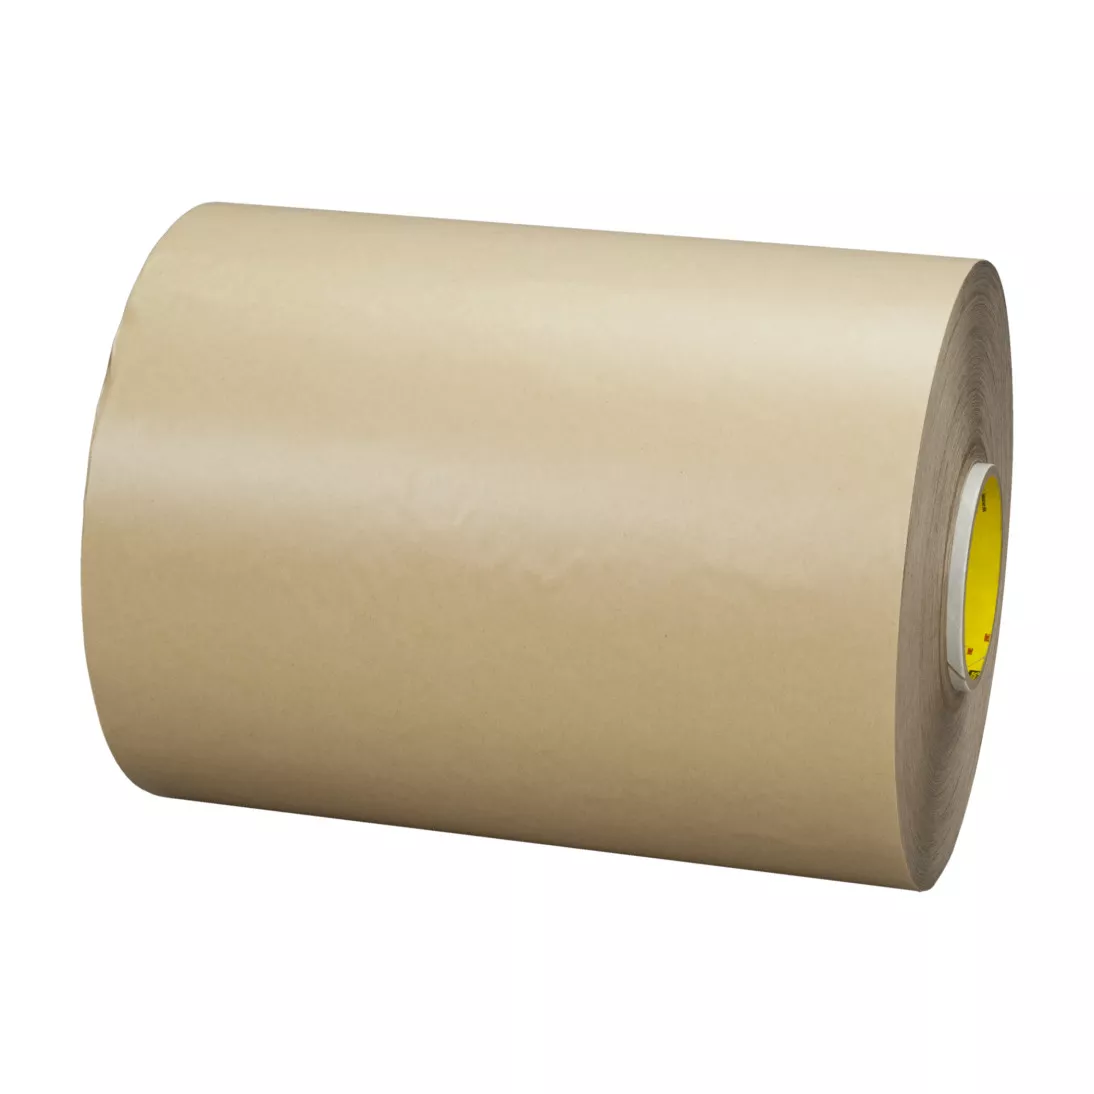 3M™ Adhesive Transfer Tape 6035PC, Clear, 60 in x 180 yd, 5 mil, 1 roll
per case